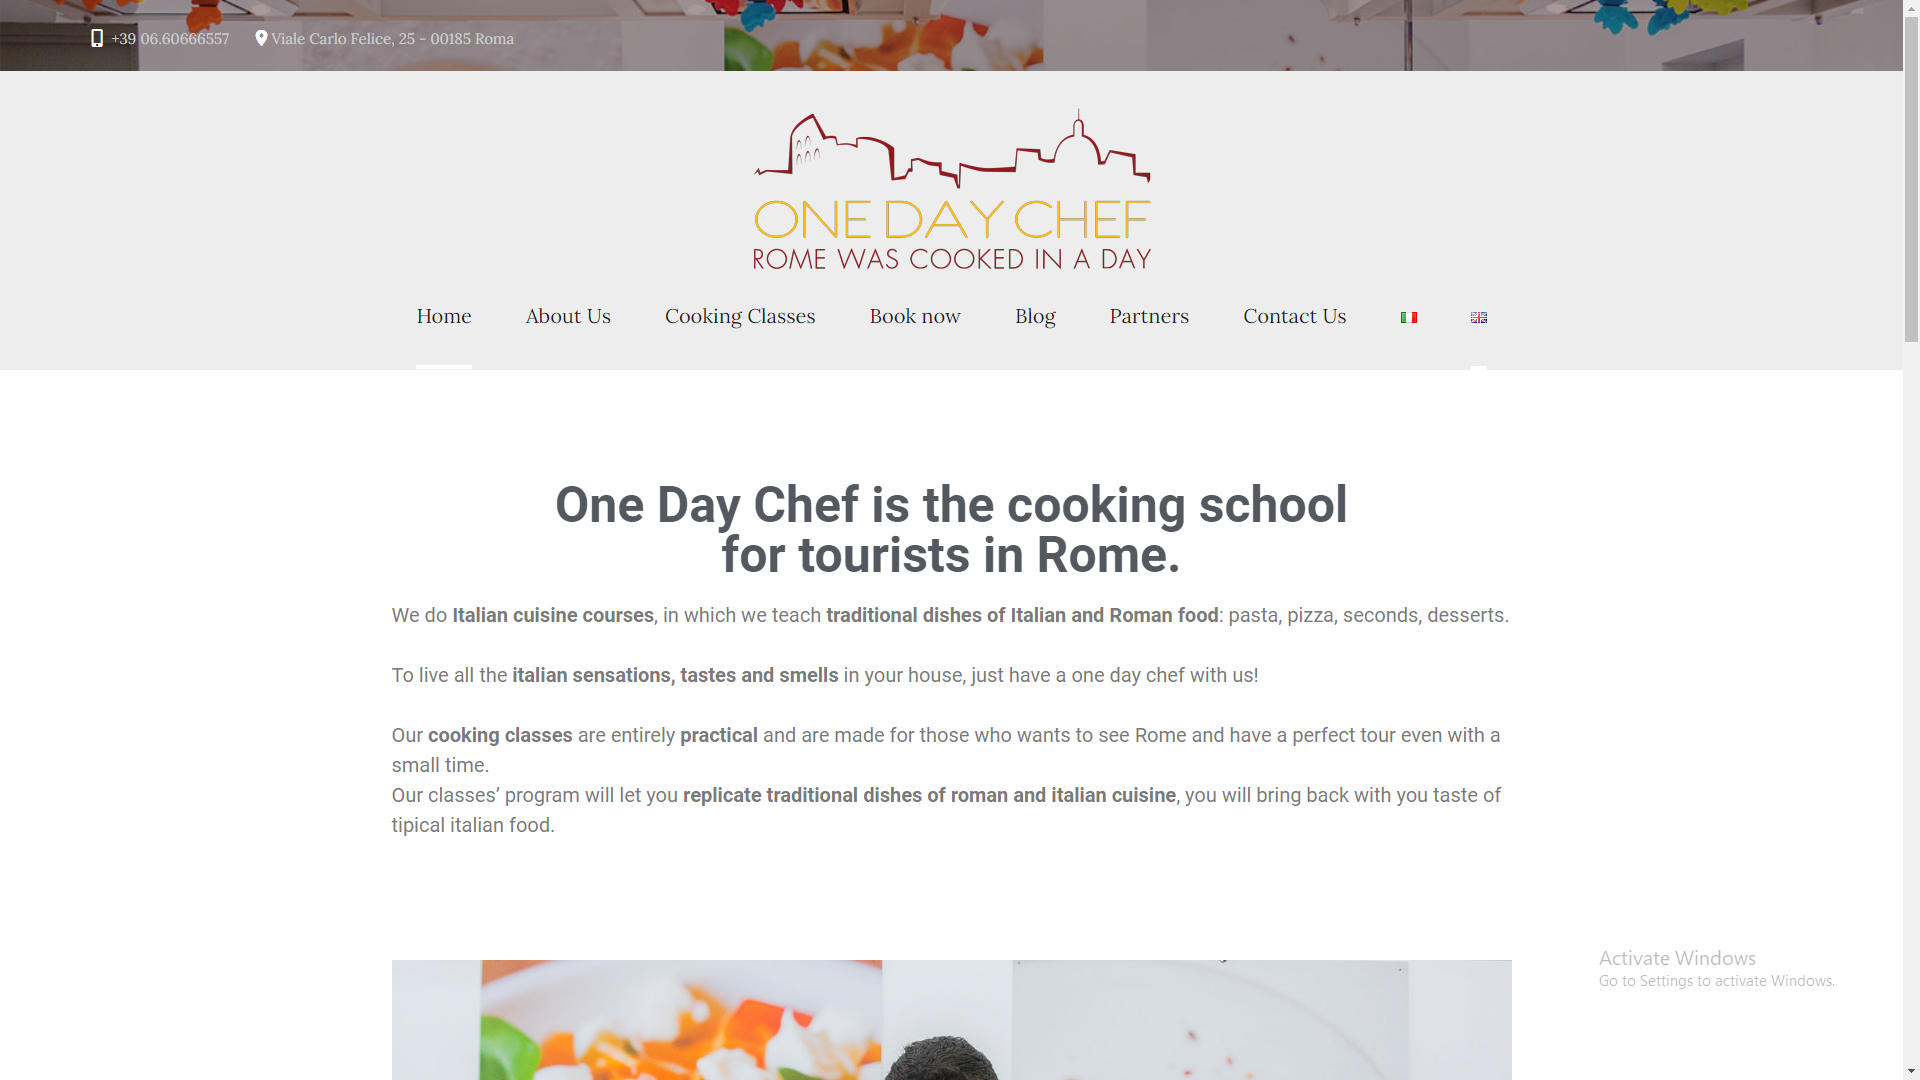 One Day Chef